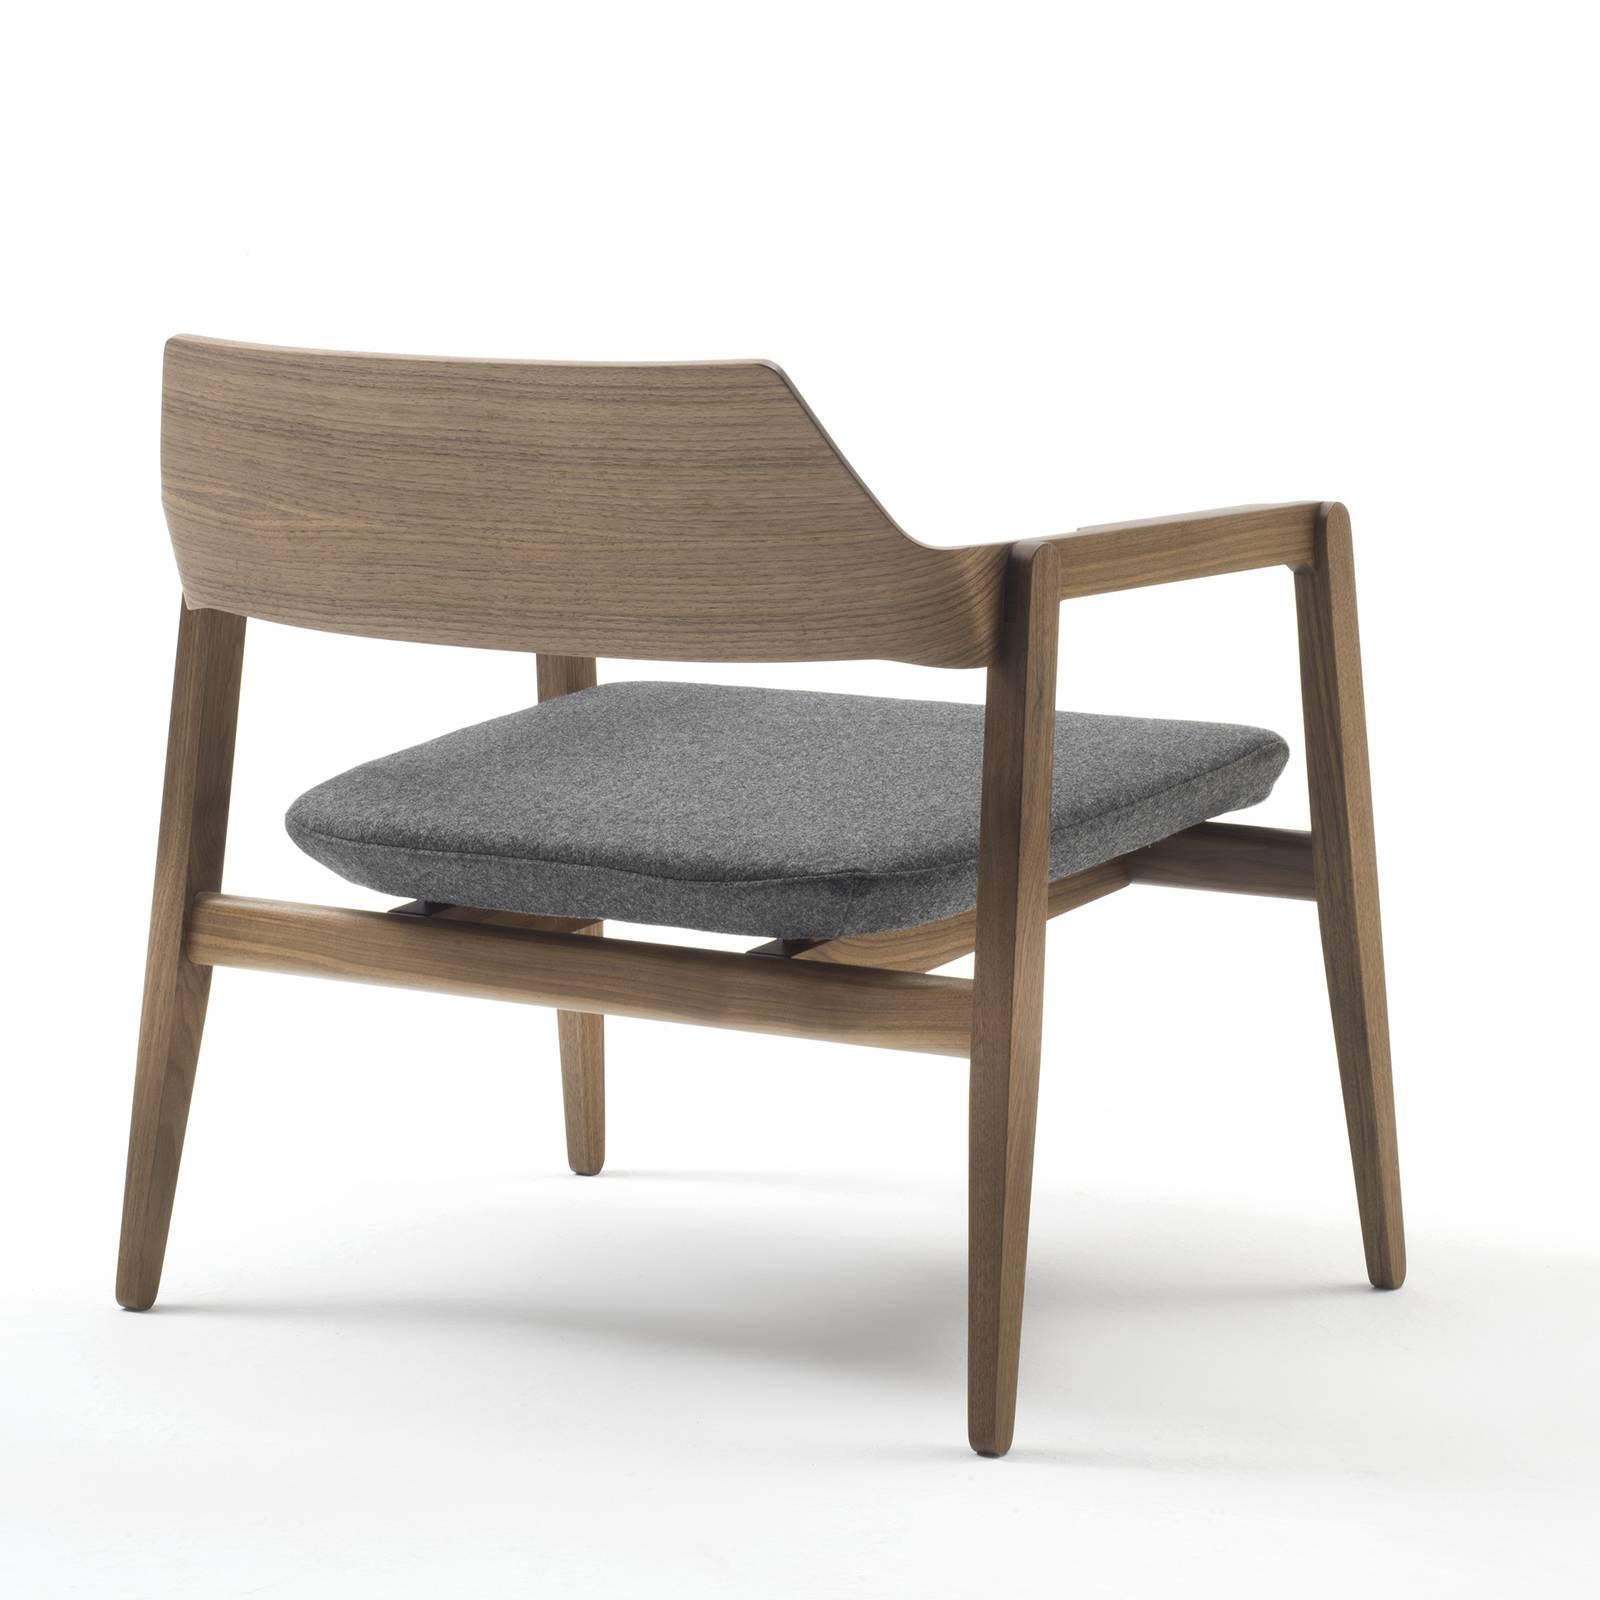 This eclectic armchair has a low and comfortable design with a curved back and a soft cushioned seat upholstered in melange gray fabric by kvadrat. The structure is made of solid oak with a natural finish with a simple yet clever aesthetic in which